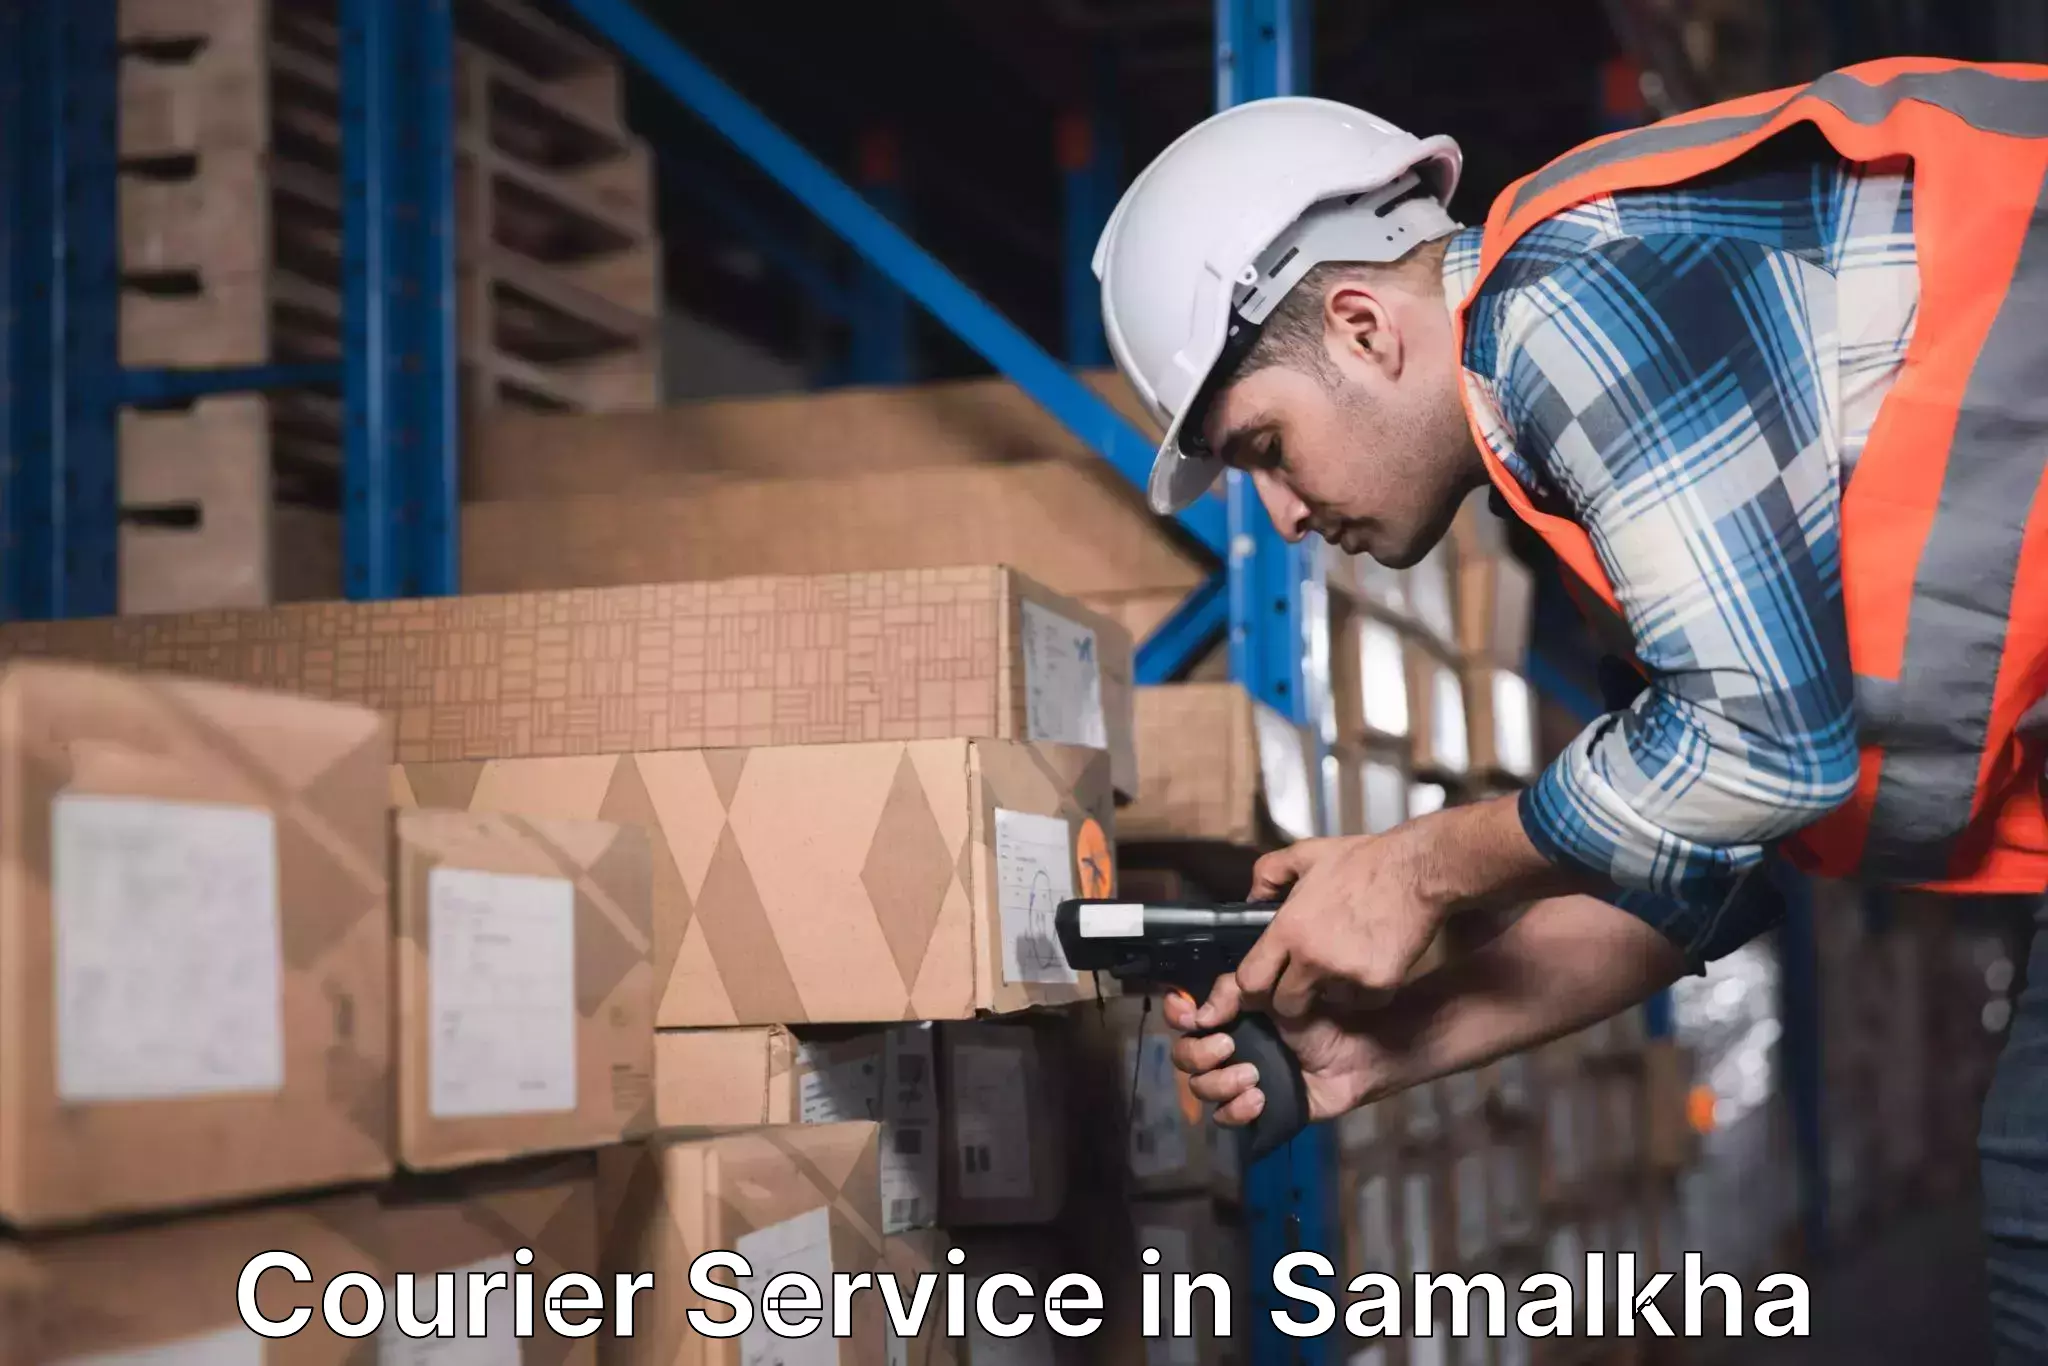 Tailored freight services in Samalkha